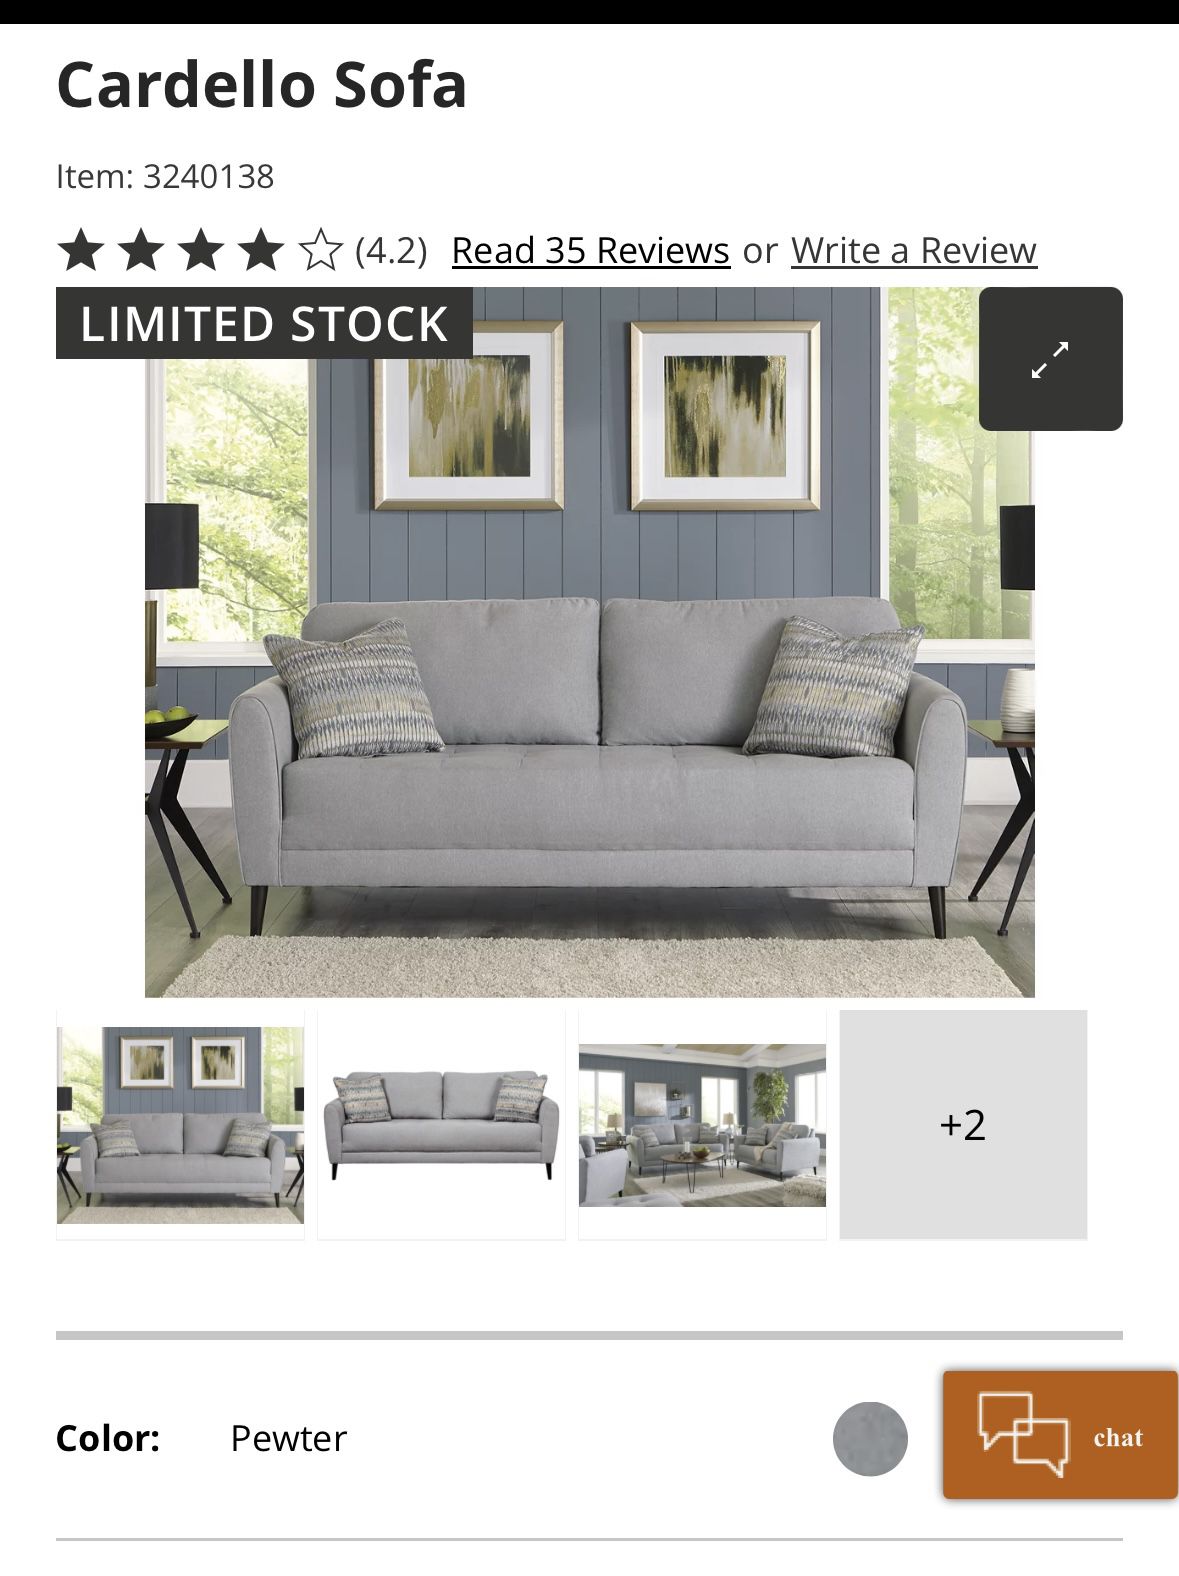 Comfortable Grey Couch - Ashley Furniture